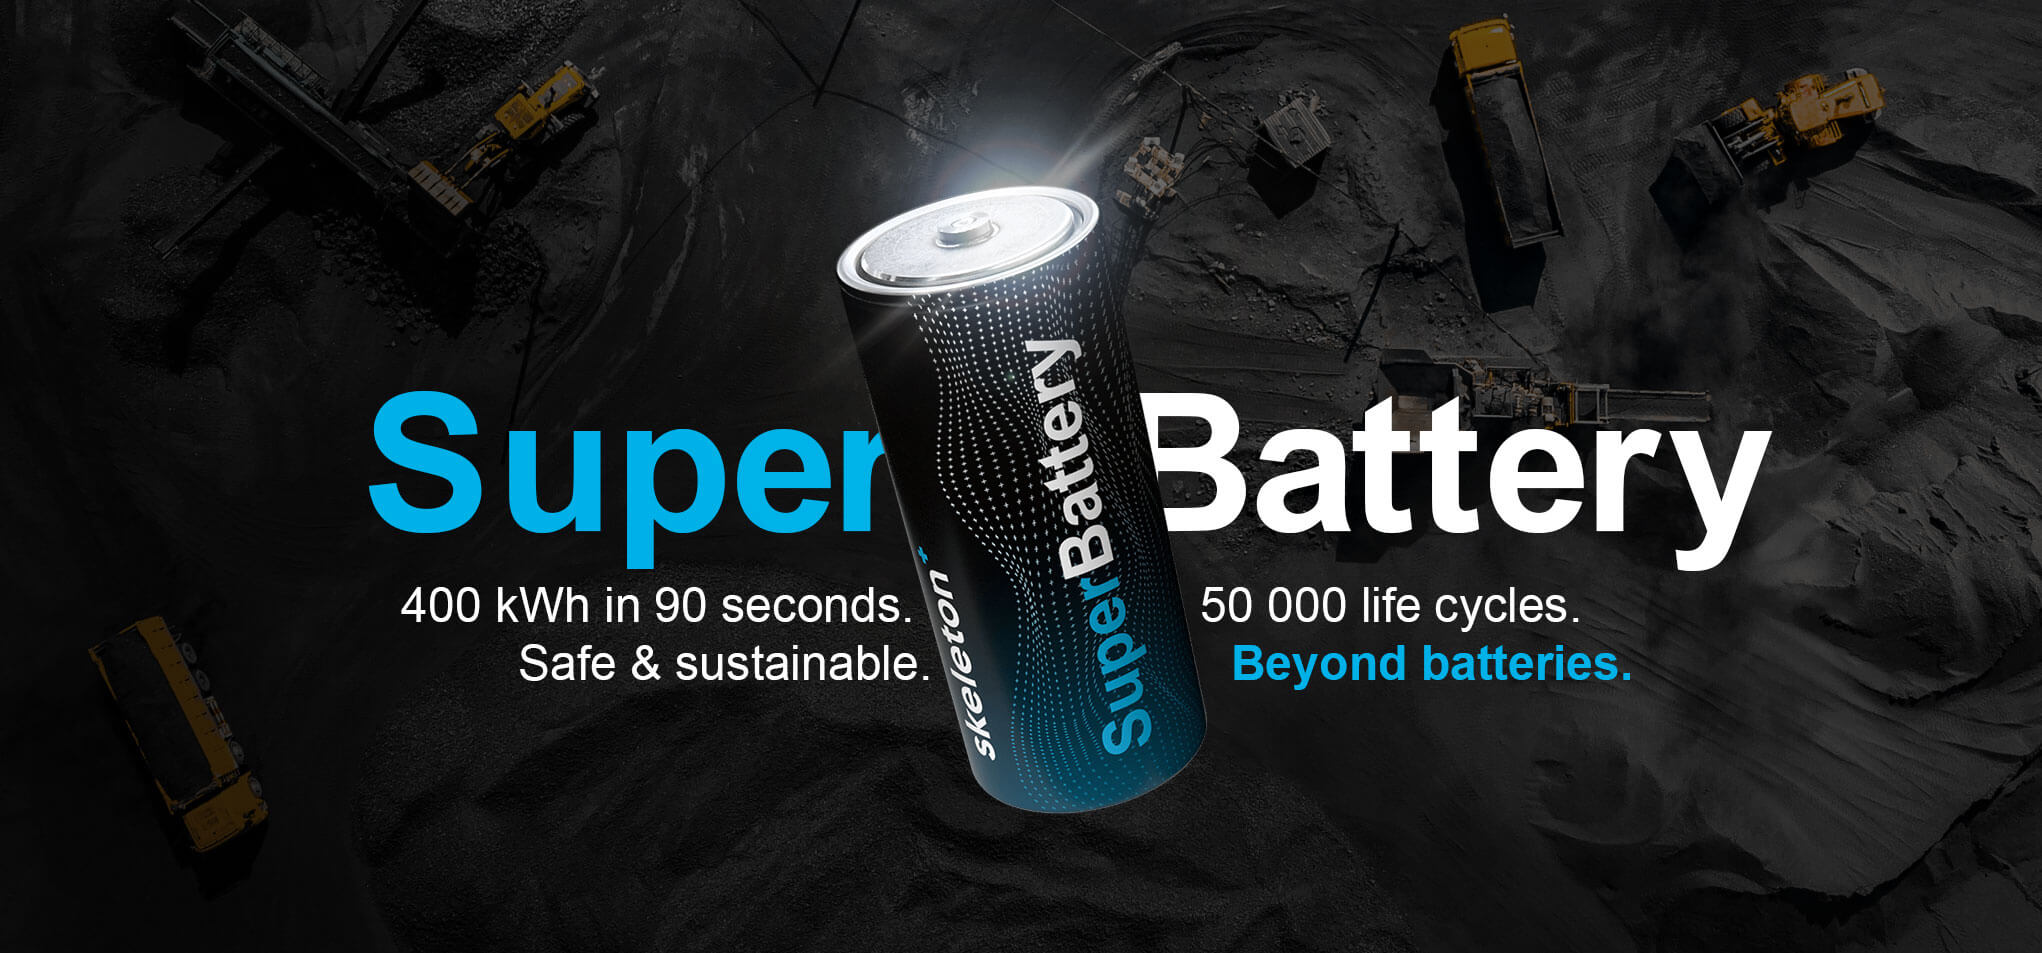 Skeleton launches its SuperBattery and unveils Shell as partner